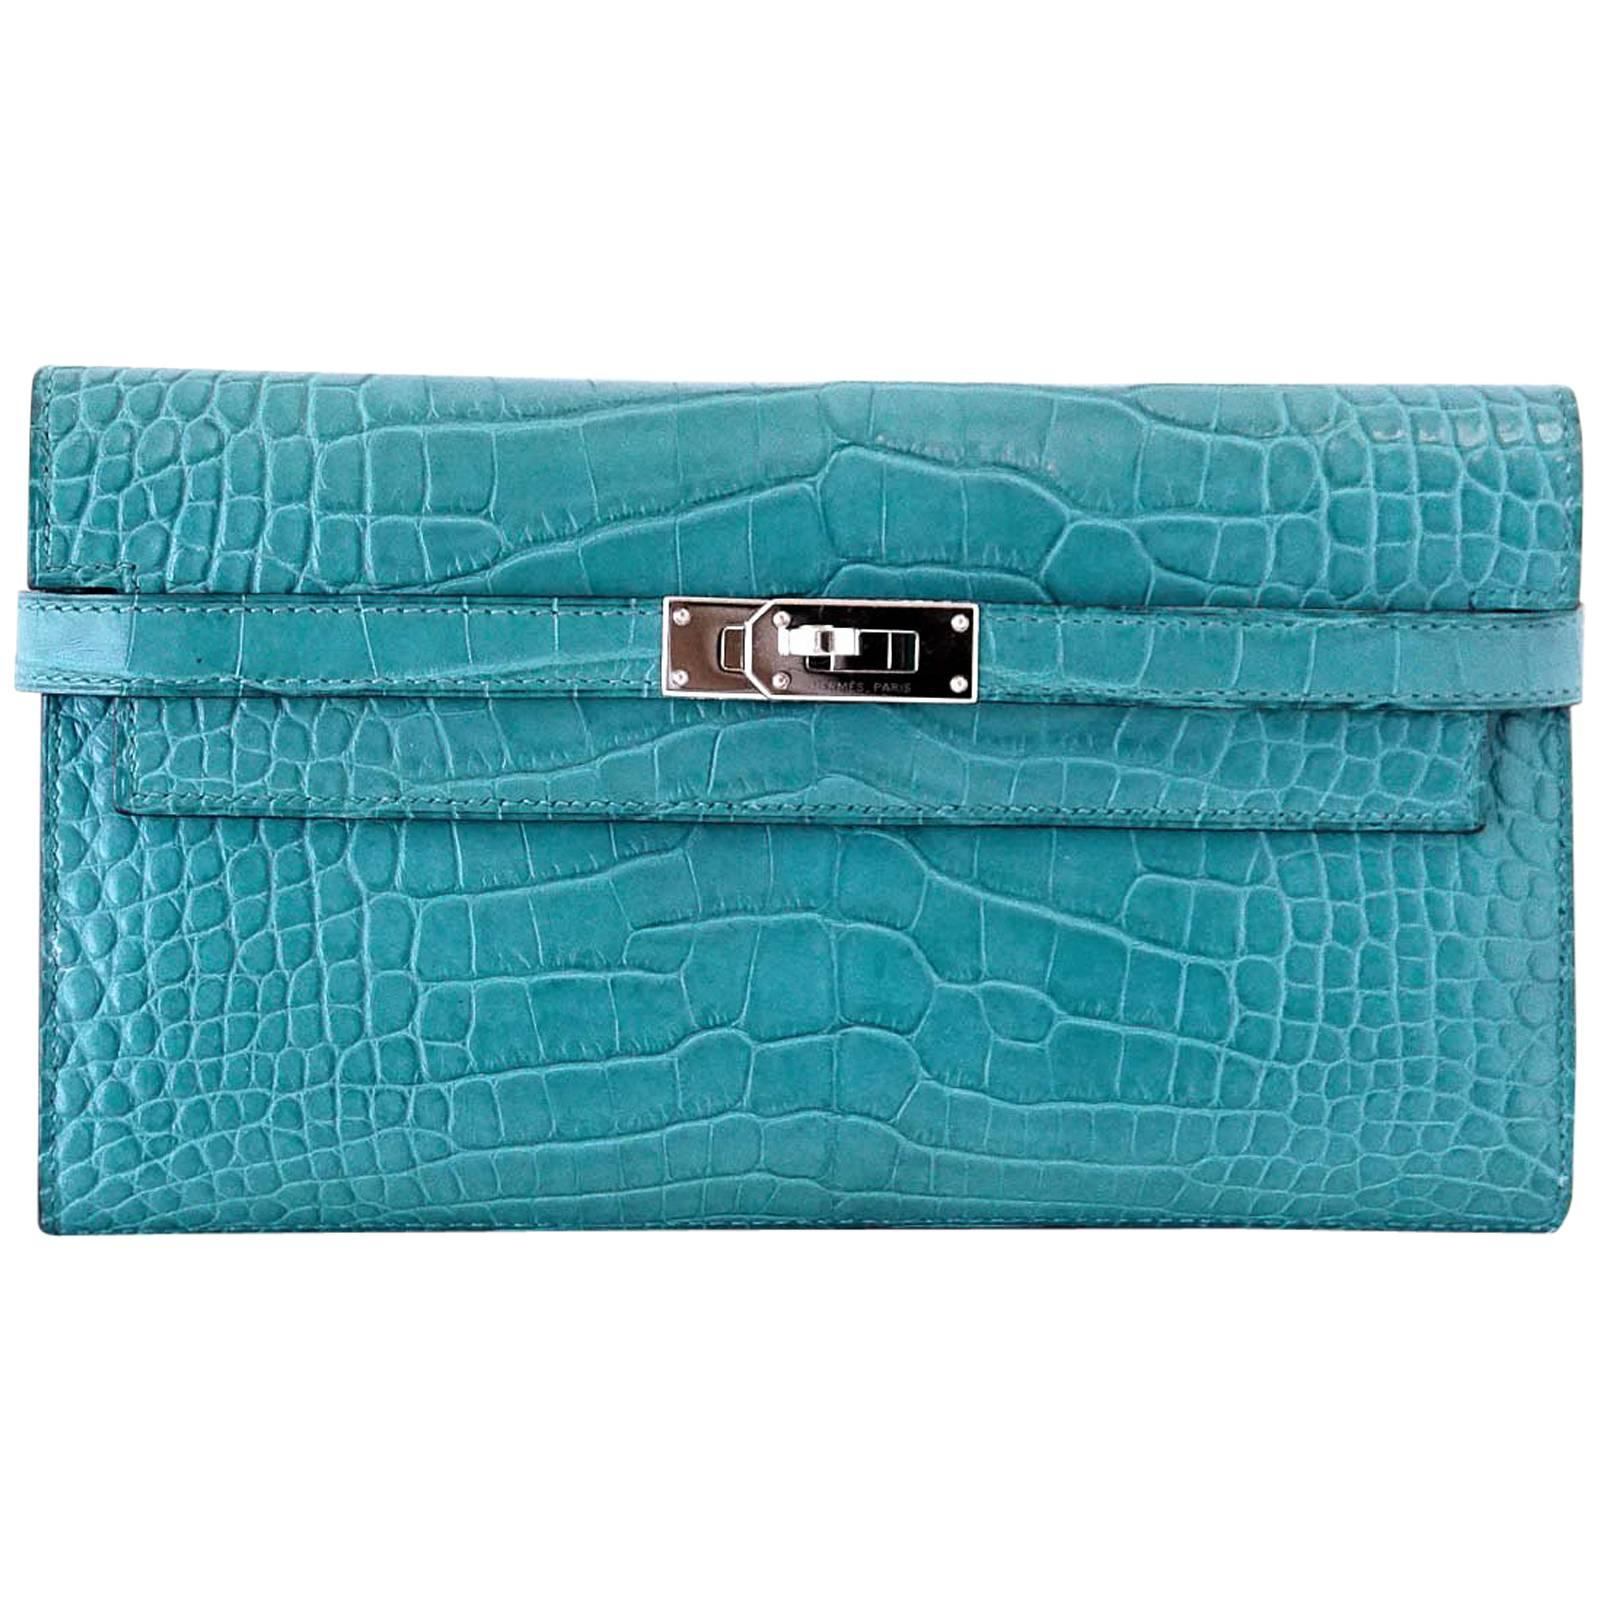 Hermes Blue Alligator Wallet with Removable Coin Purse - Handbags